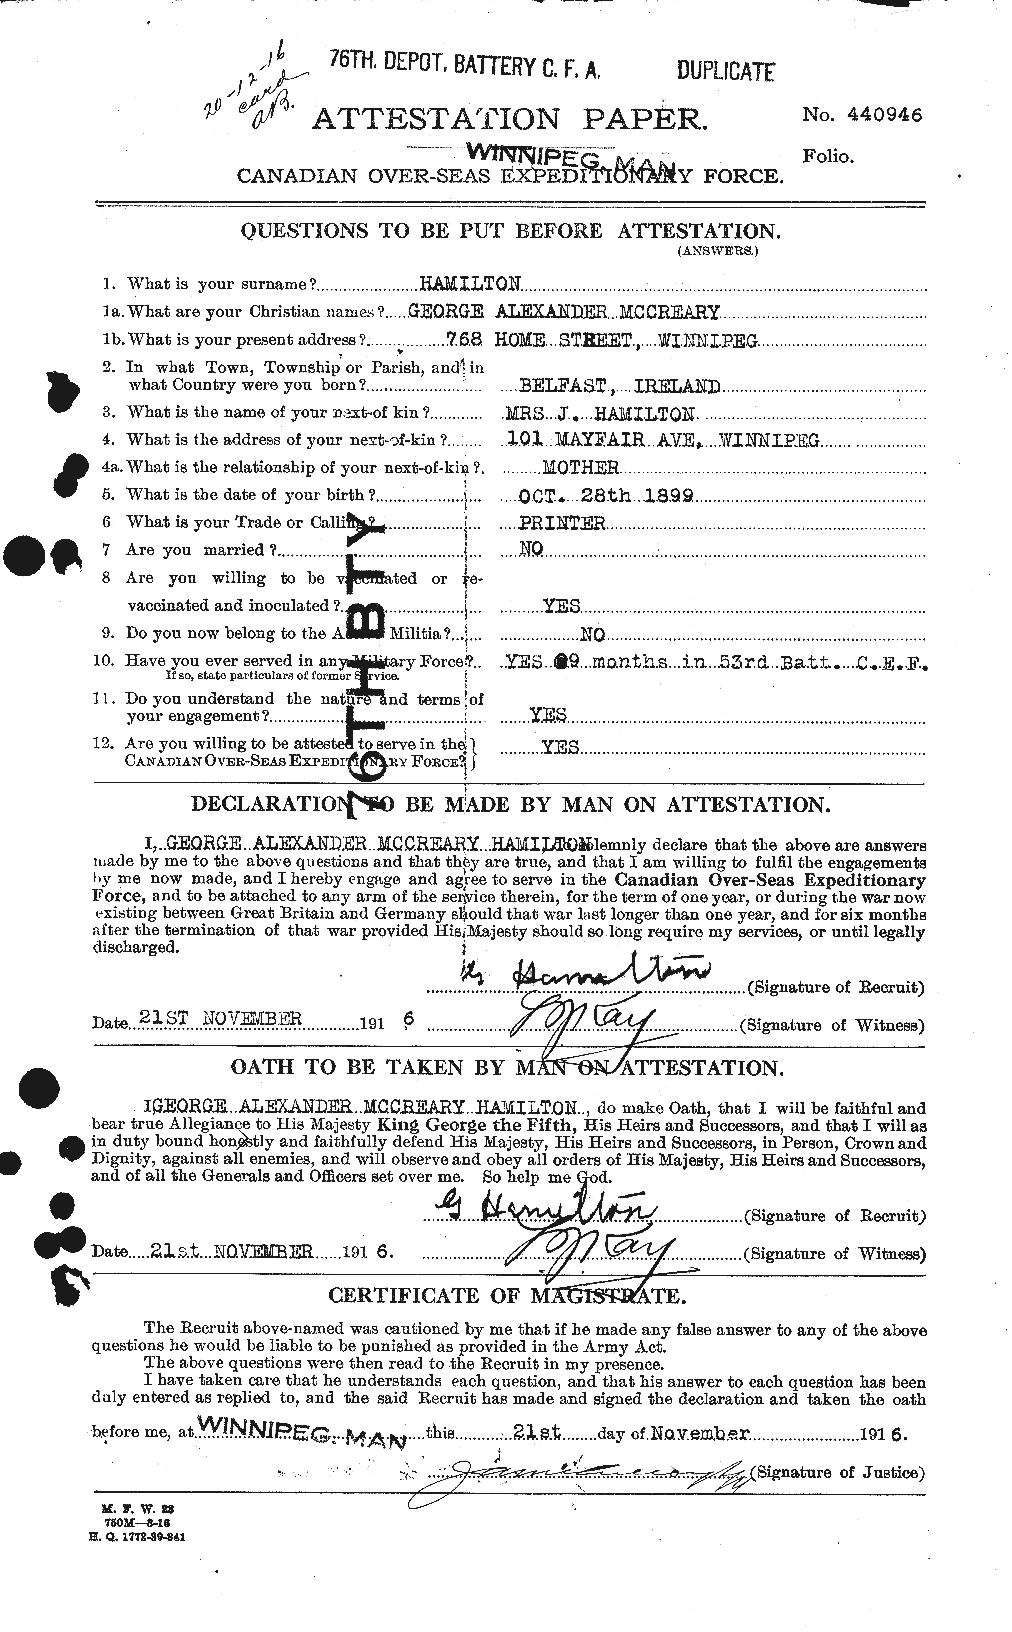 Personnel Records of the First World War - CEF 372447a